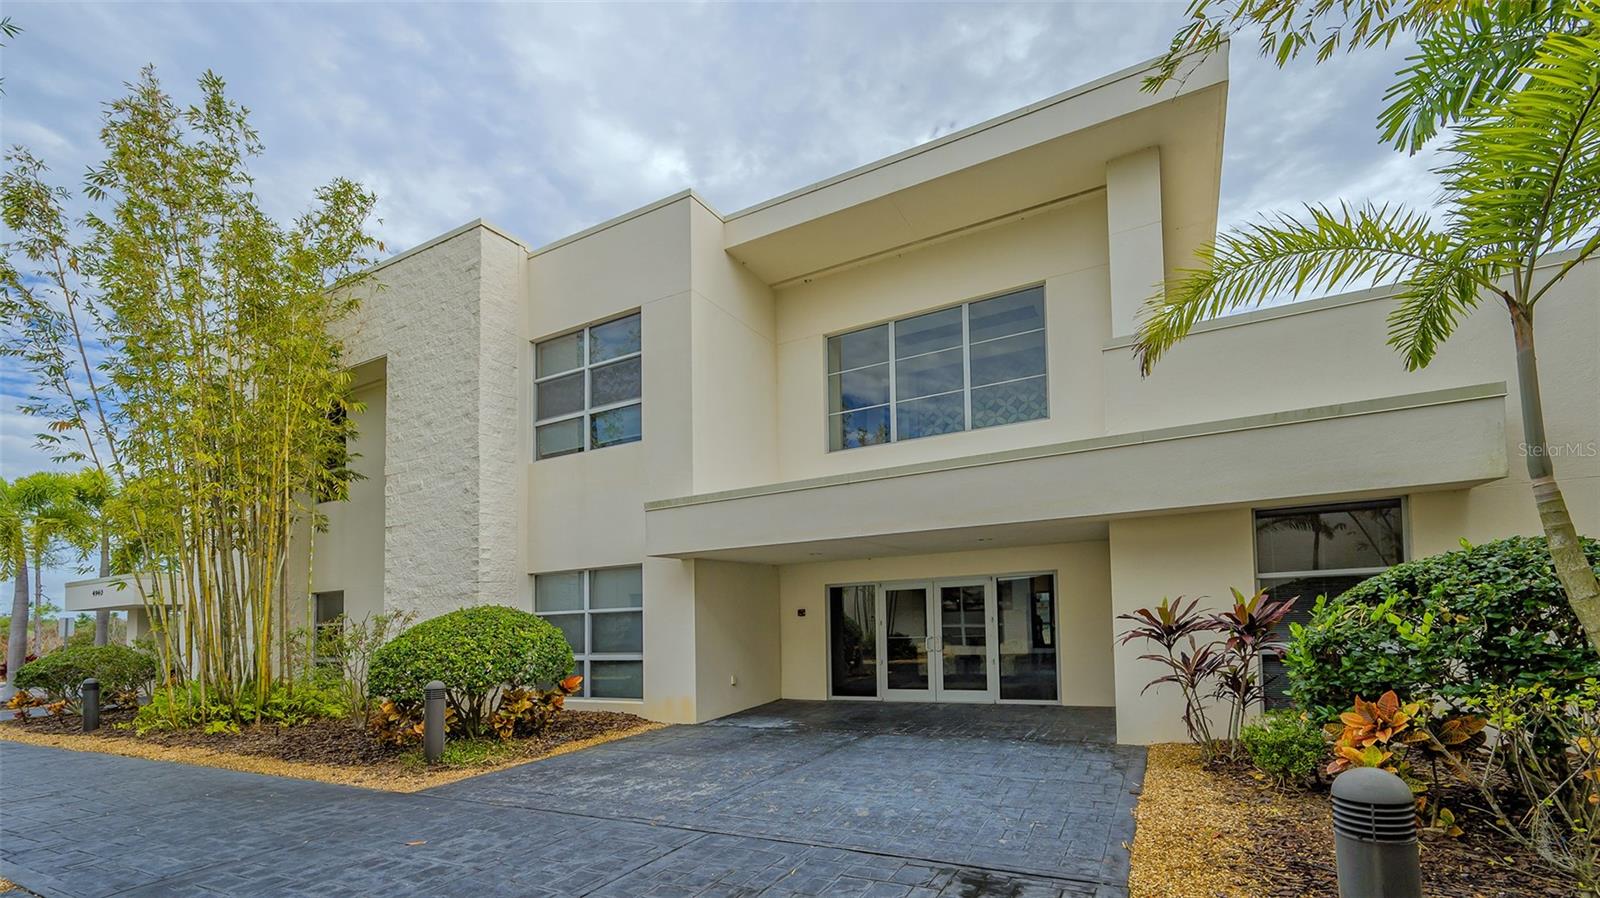 Sarasota Office Building For Sale - Fully Leased